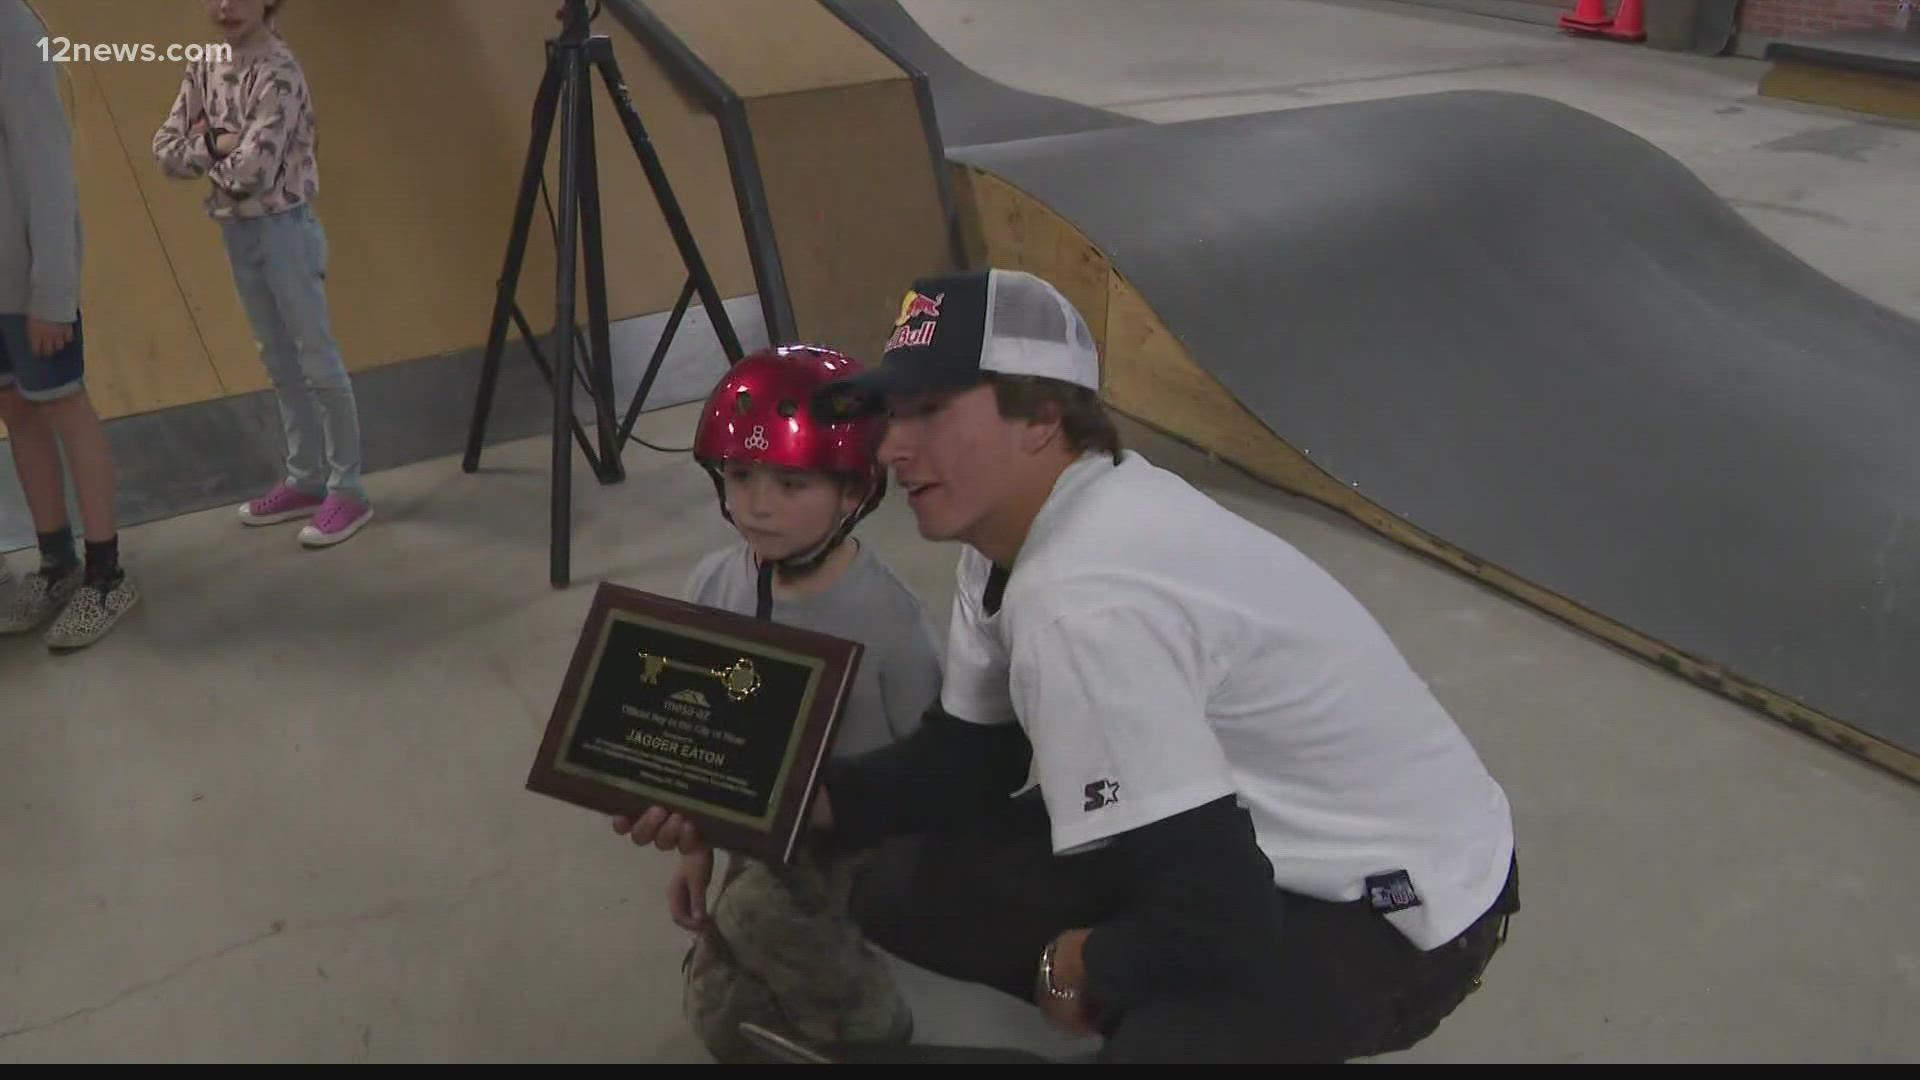 A special honor was given on Tuesday for Olympian Jagger Eaton. Team USA’s Olympic skateboarder was given a key to the City of Mesa.